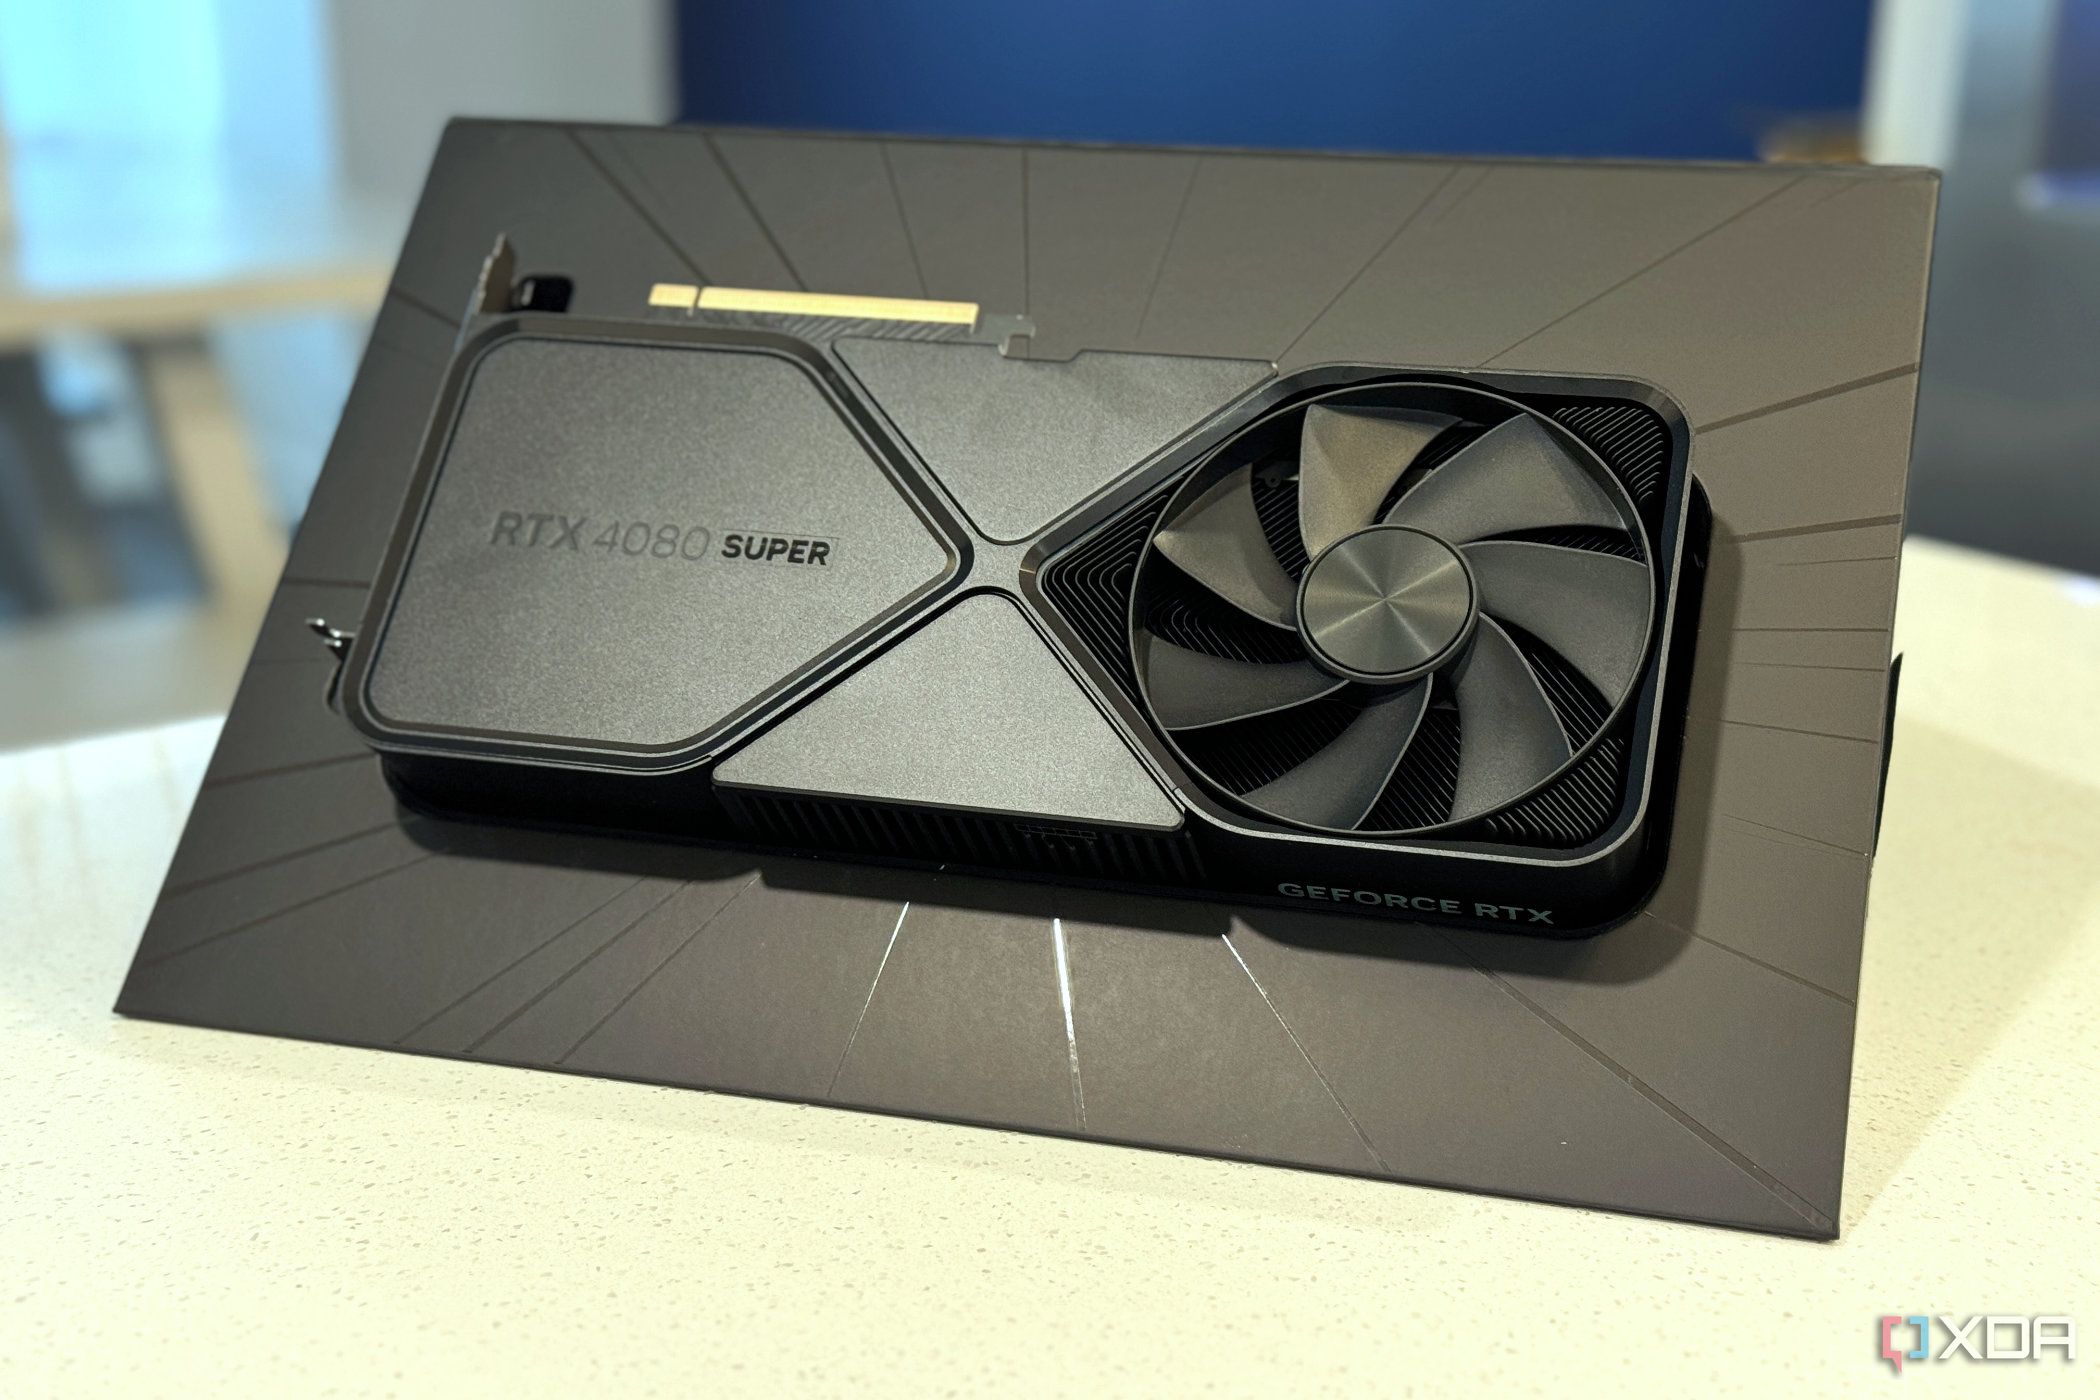 nvidia geforce rtx 4080 super fe seen in the shipping box it came in